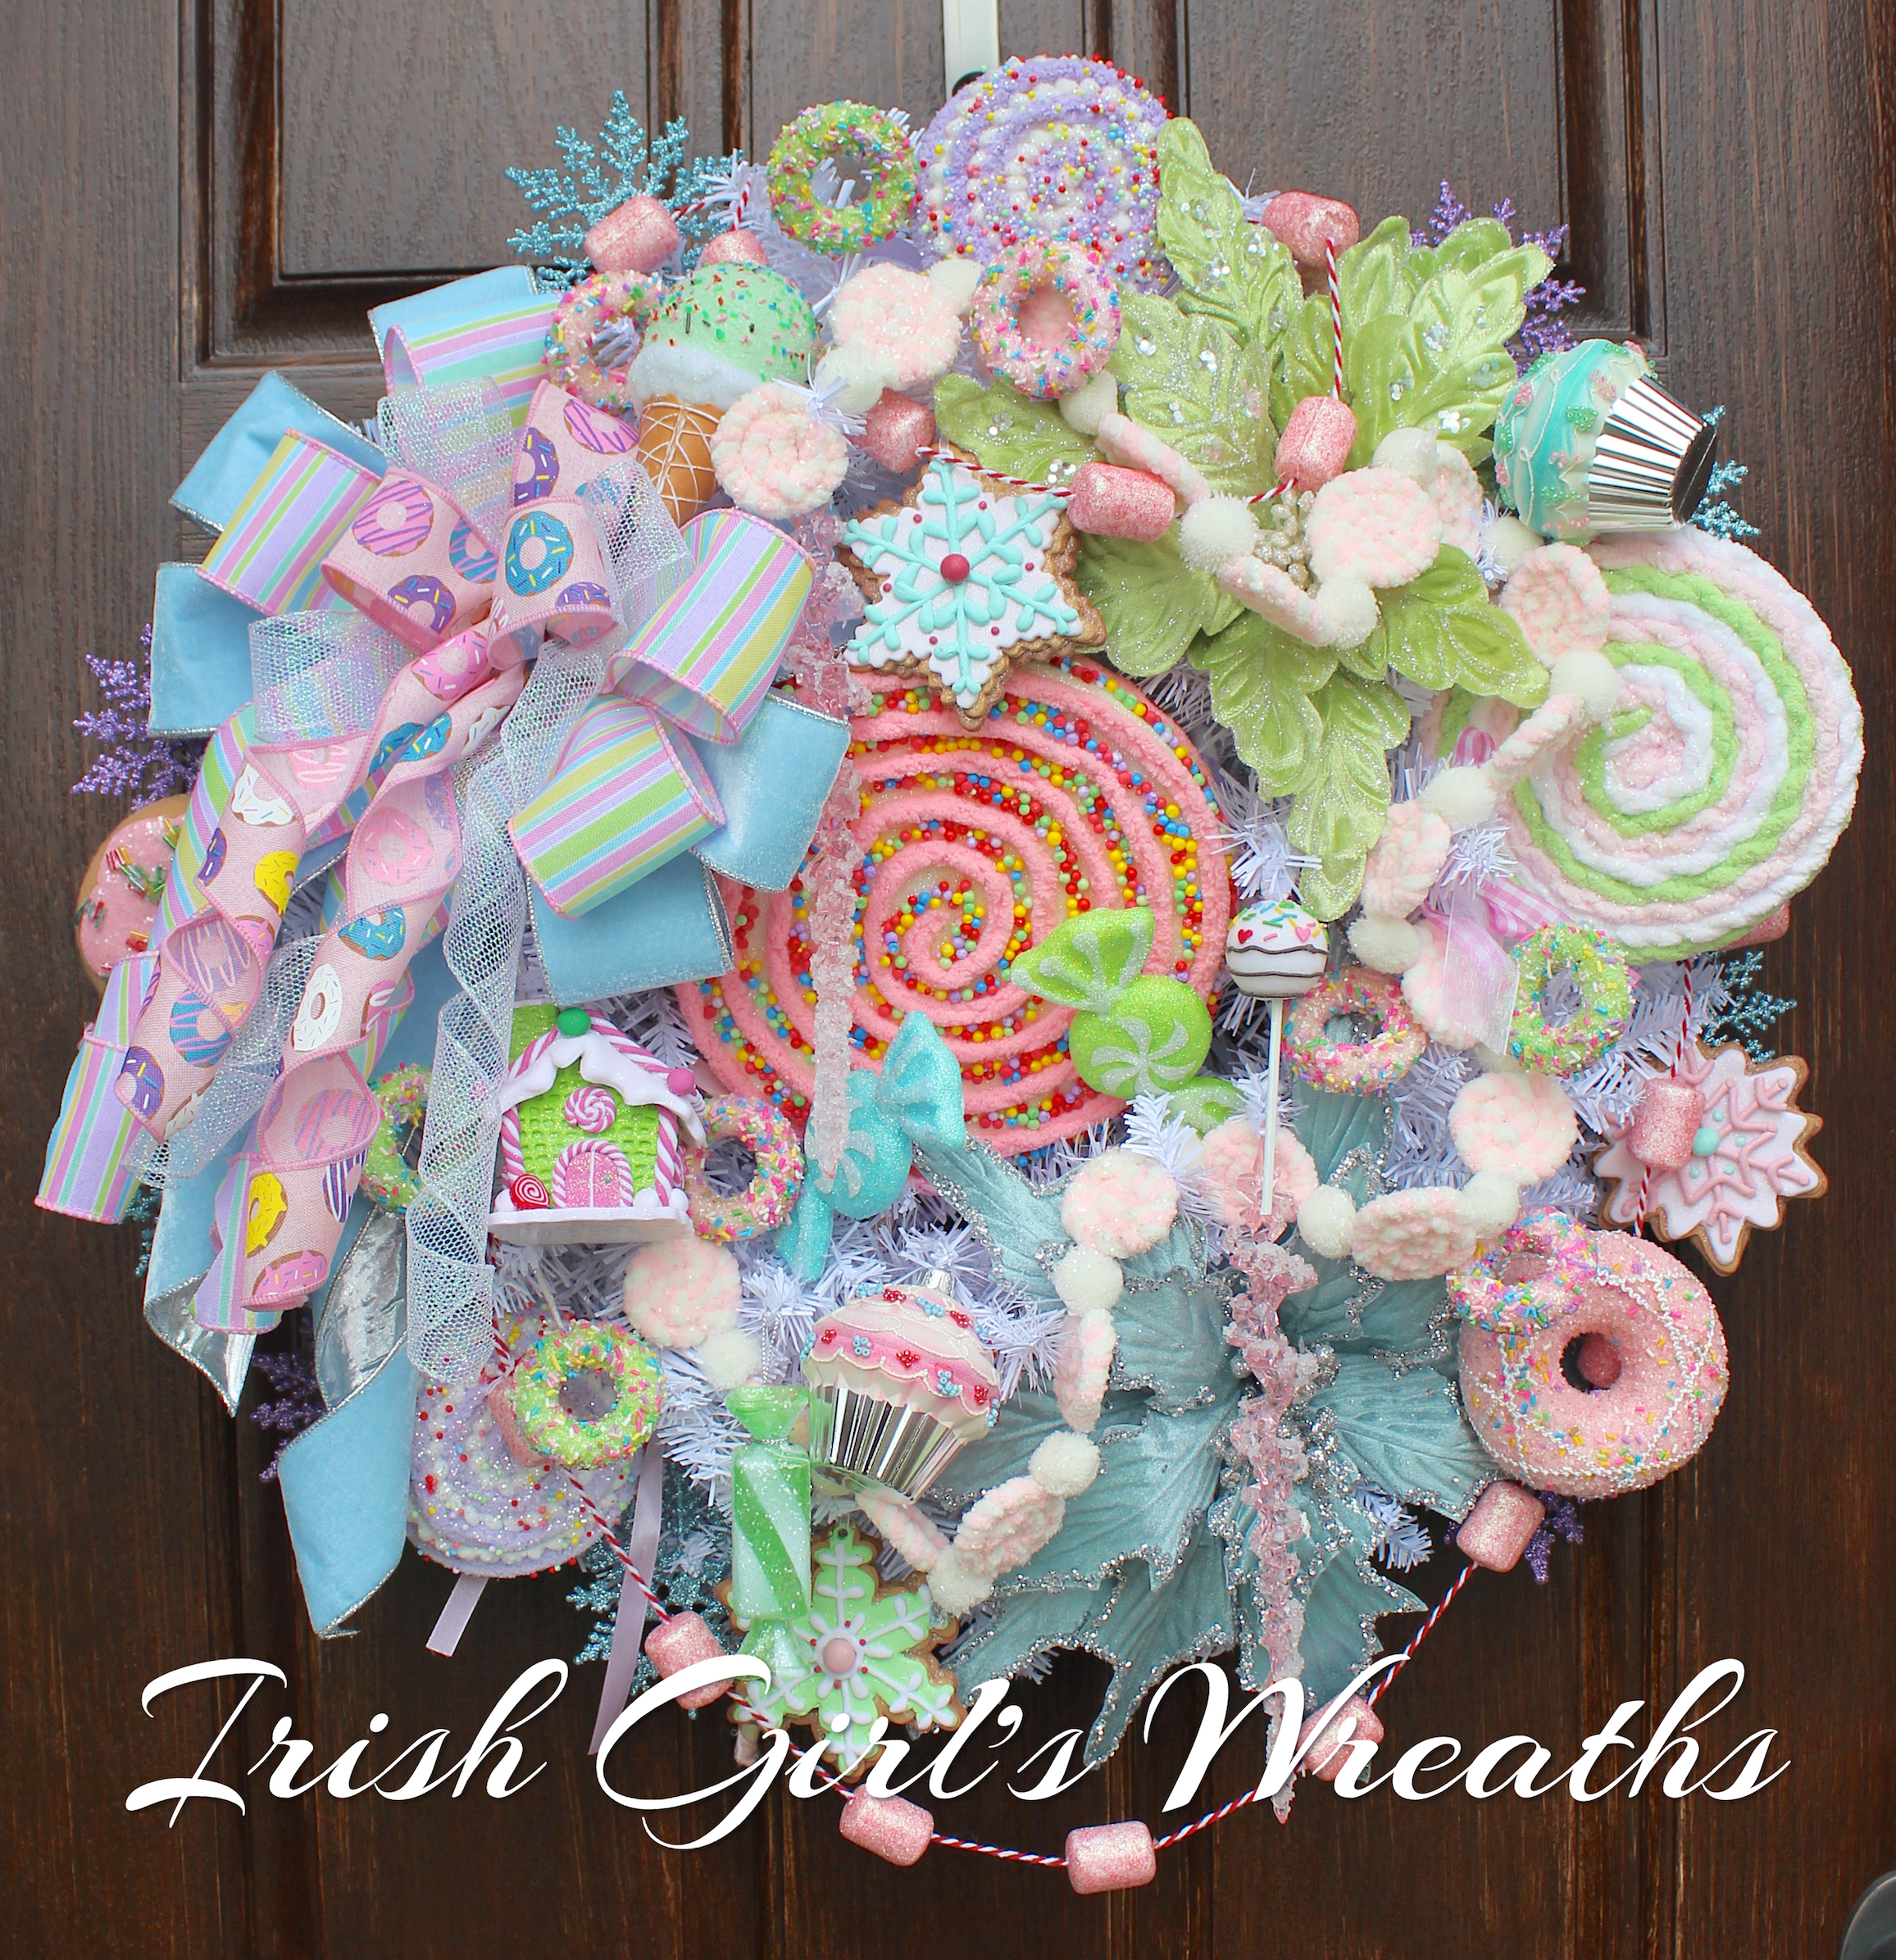 Irish Girl's Wreaths  Top Quality Handmade Artisan Floral Wreaths for all  Seasons » Deluxe Pastel Sweet Treat Candy Donuts Christmas Wreath, Pink  Christmas, Lollipops, Light Blue Christmas, Christmas Wreath